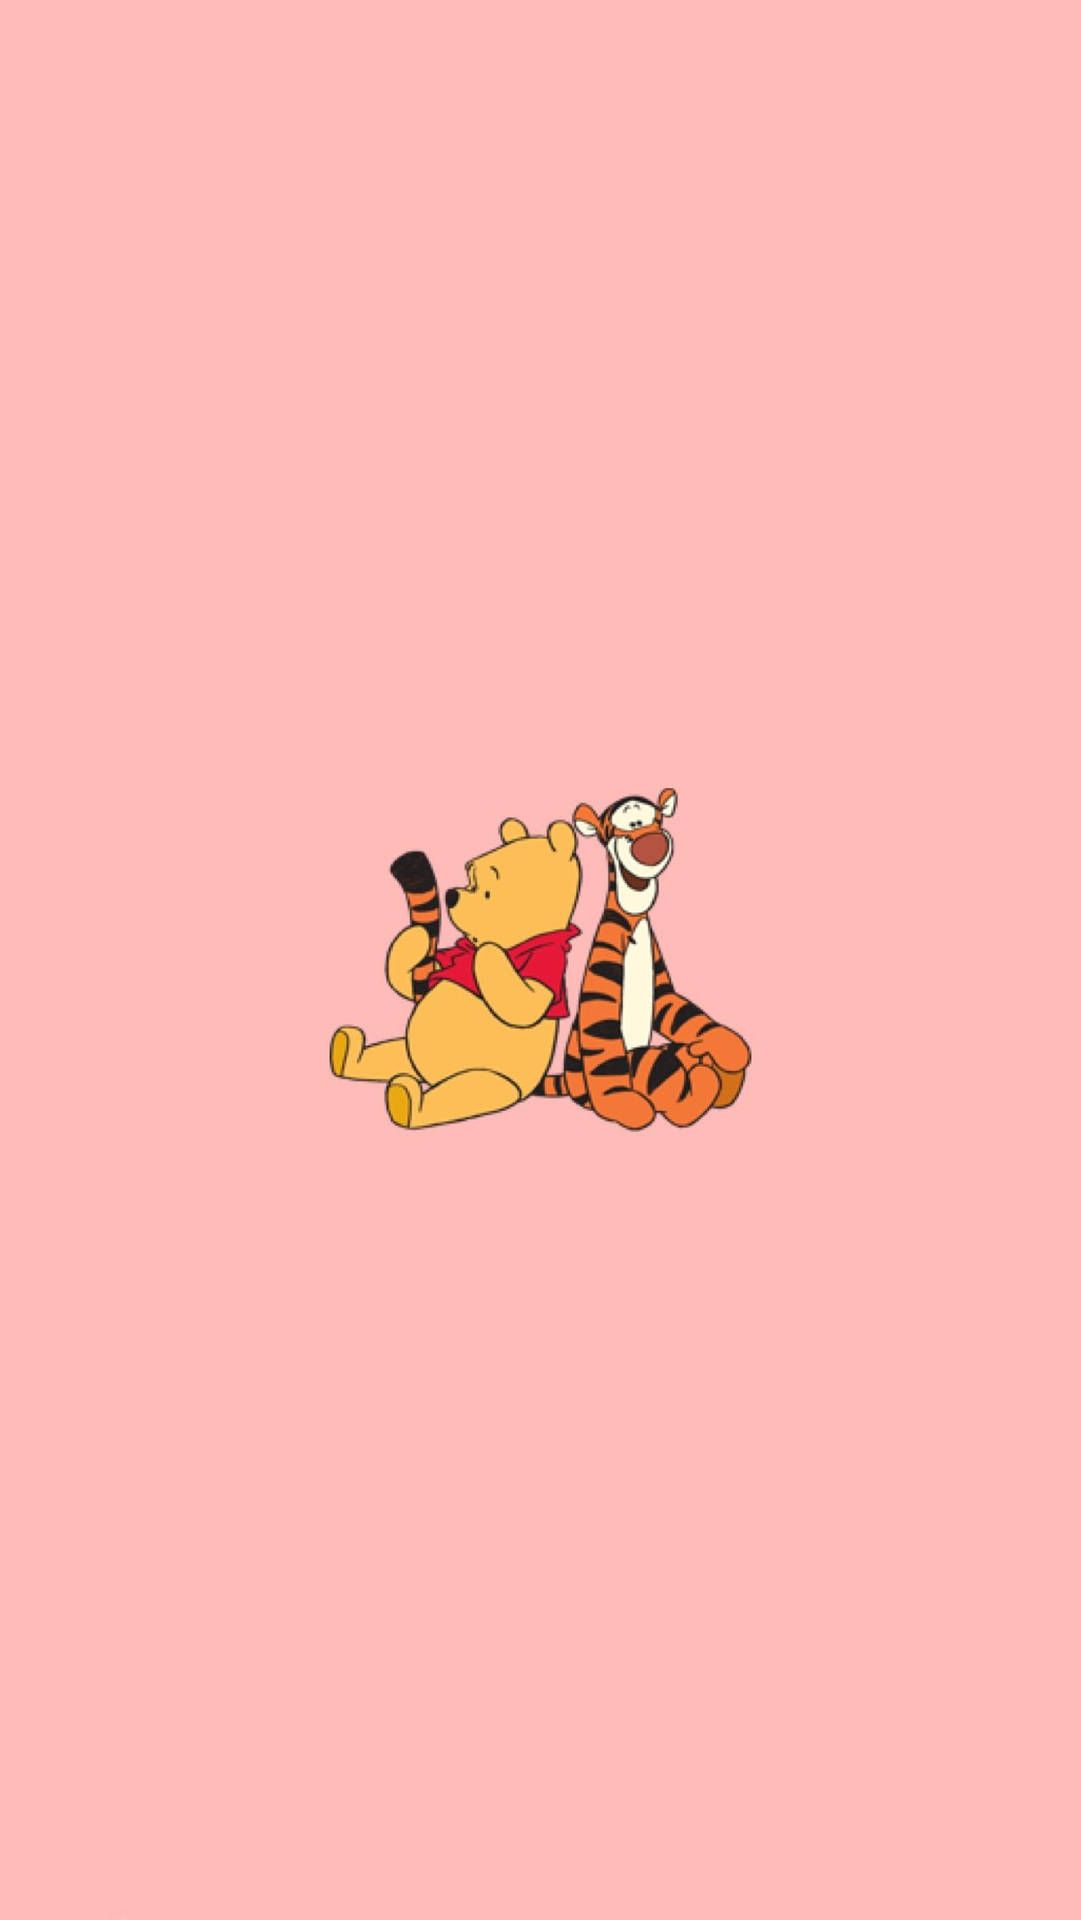 Winnie the pooh and tigger on a pink background - Disney